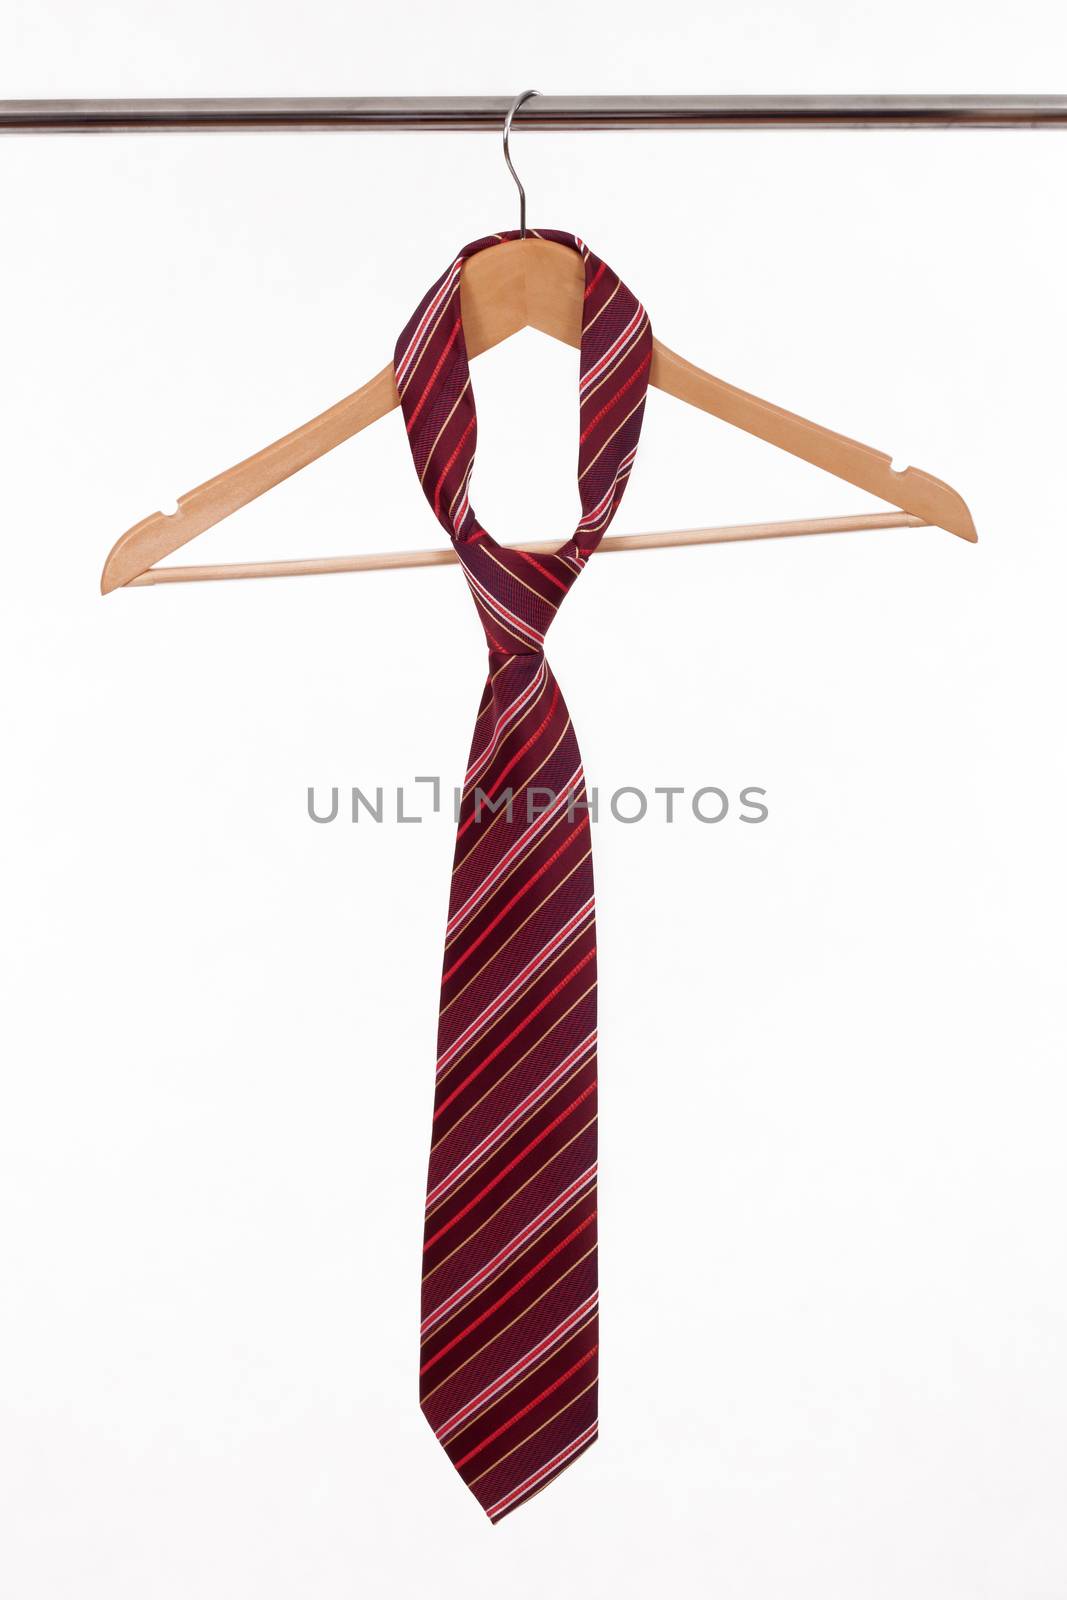 Hanger for clothes with tie by aguirre_mar